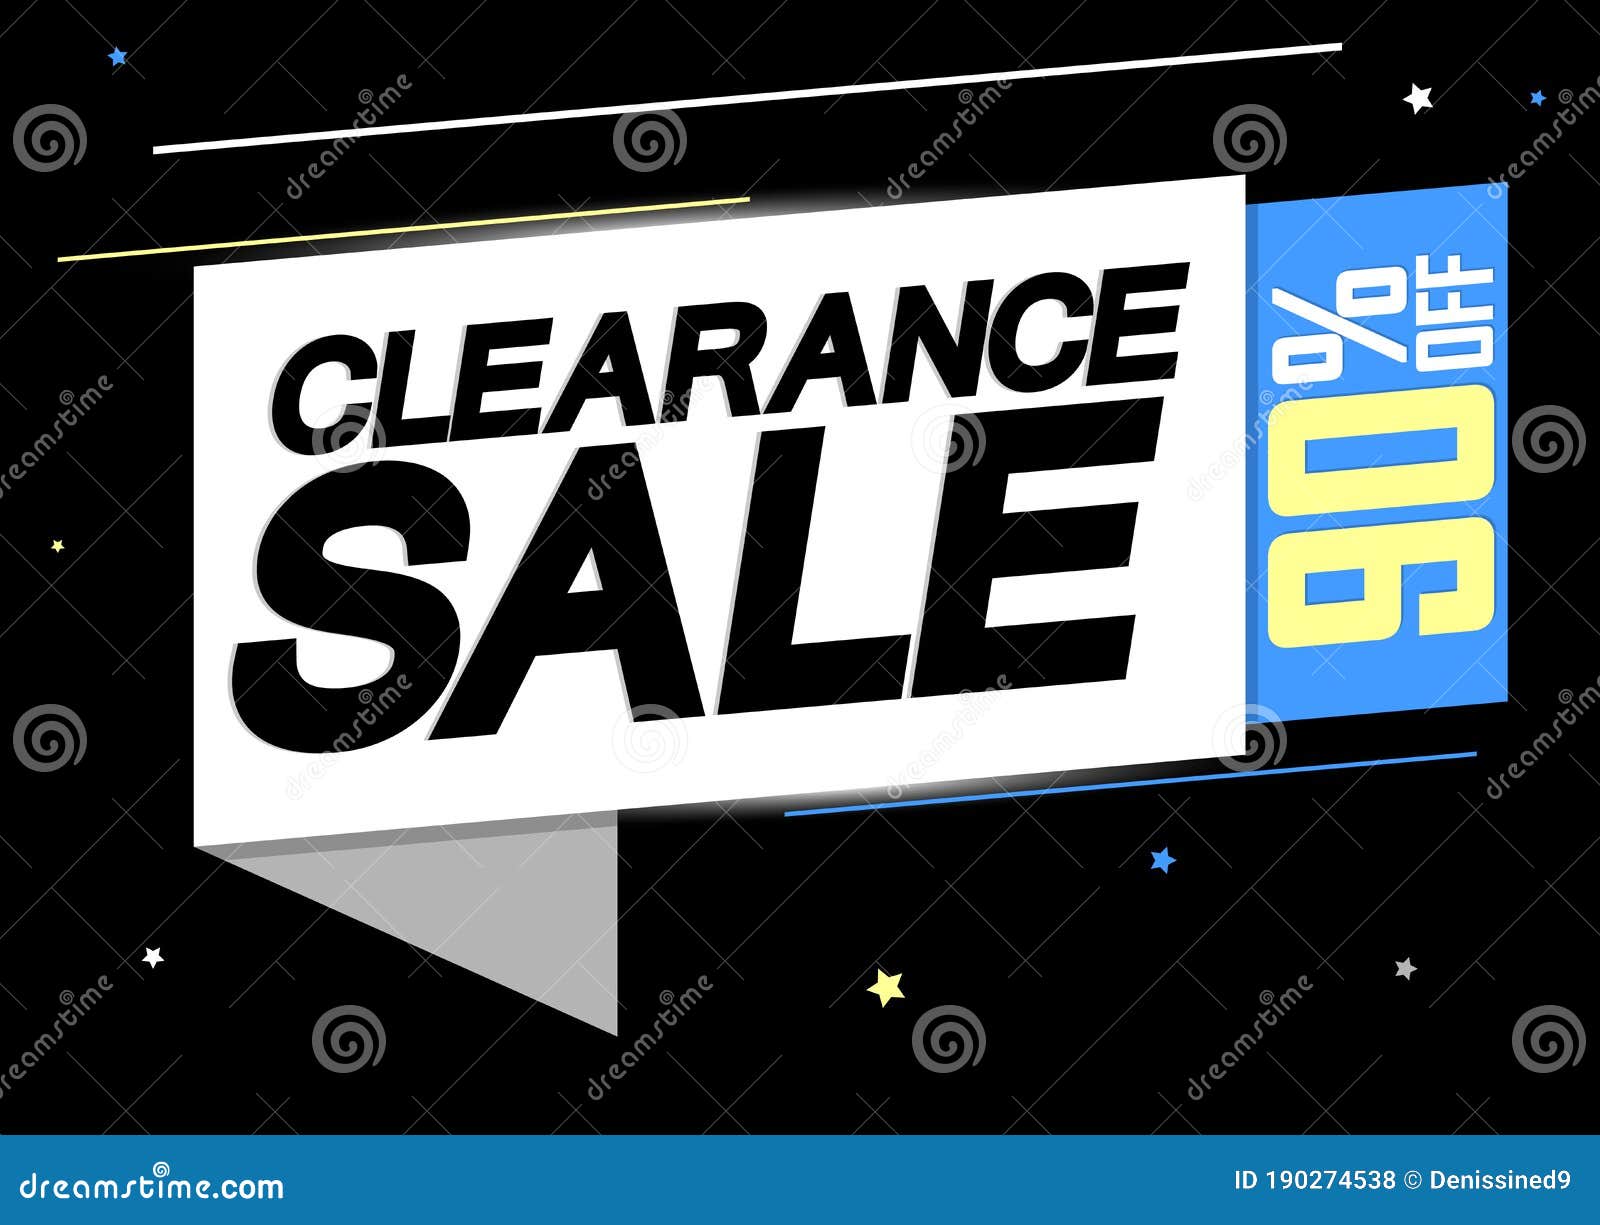 Clearance Sale 90 Off Special Offer Banner Design Template Discount Vector Illustration Stock Vector Illustration Of Graphic Discount